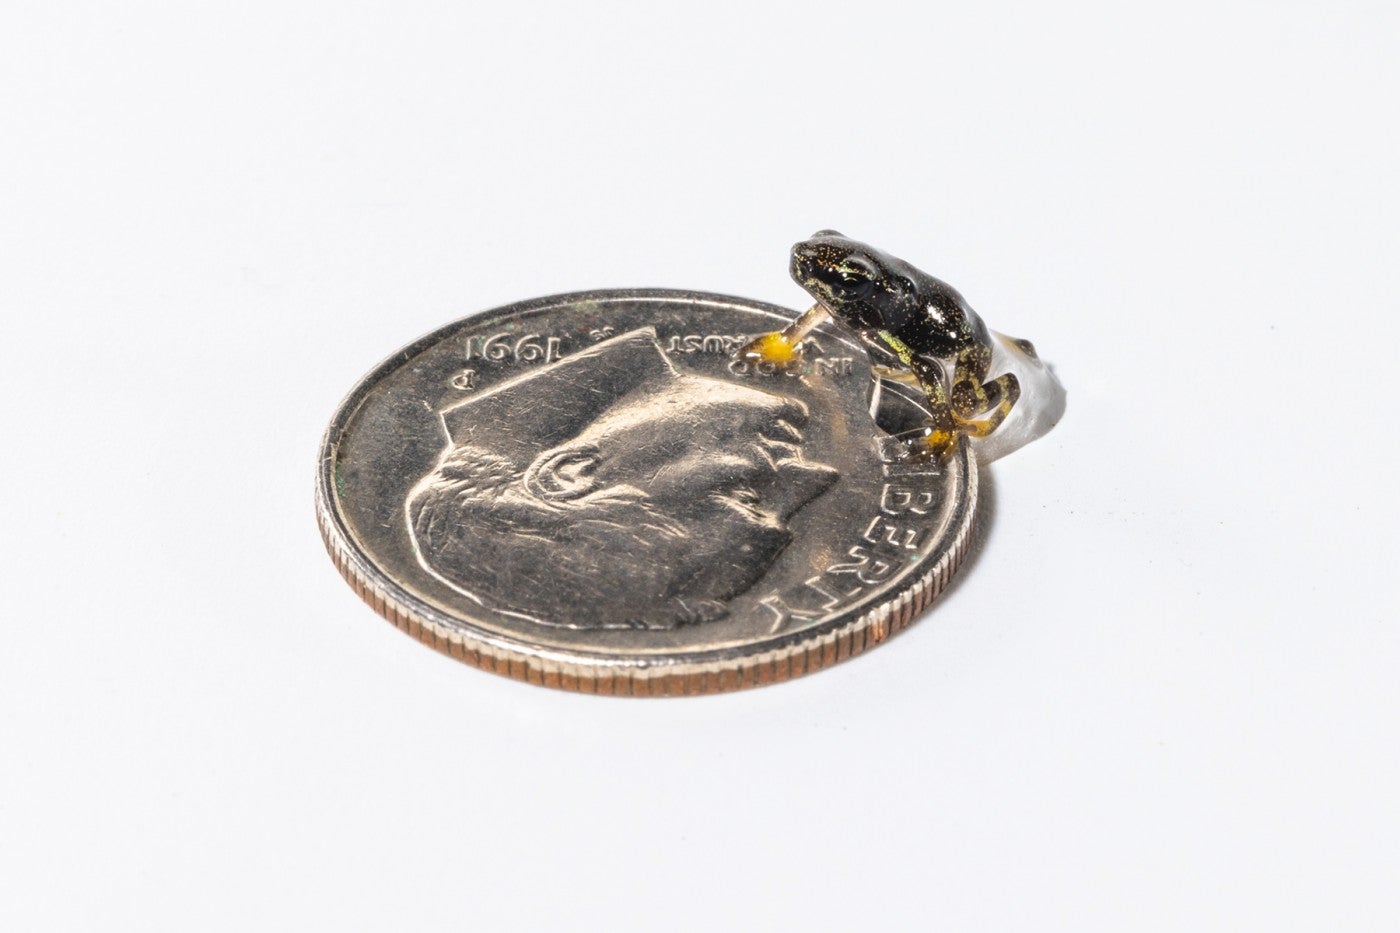 A Panamanian golden frog toadlet stands on top of a dime. 